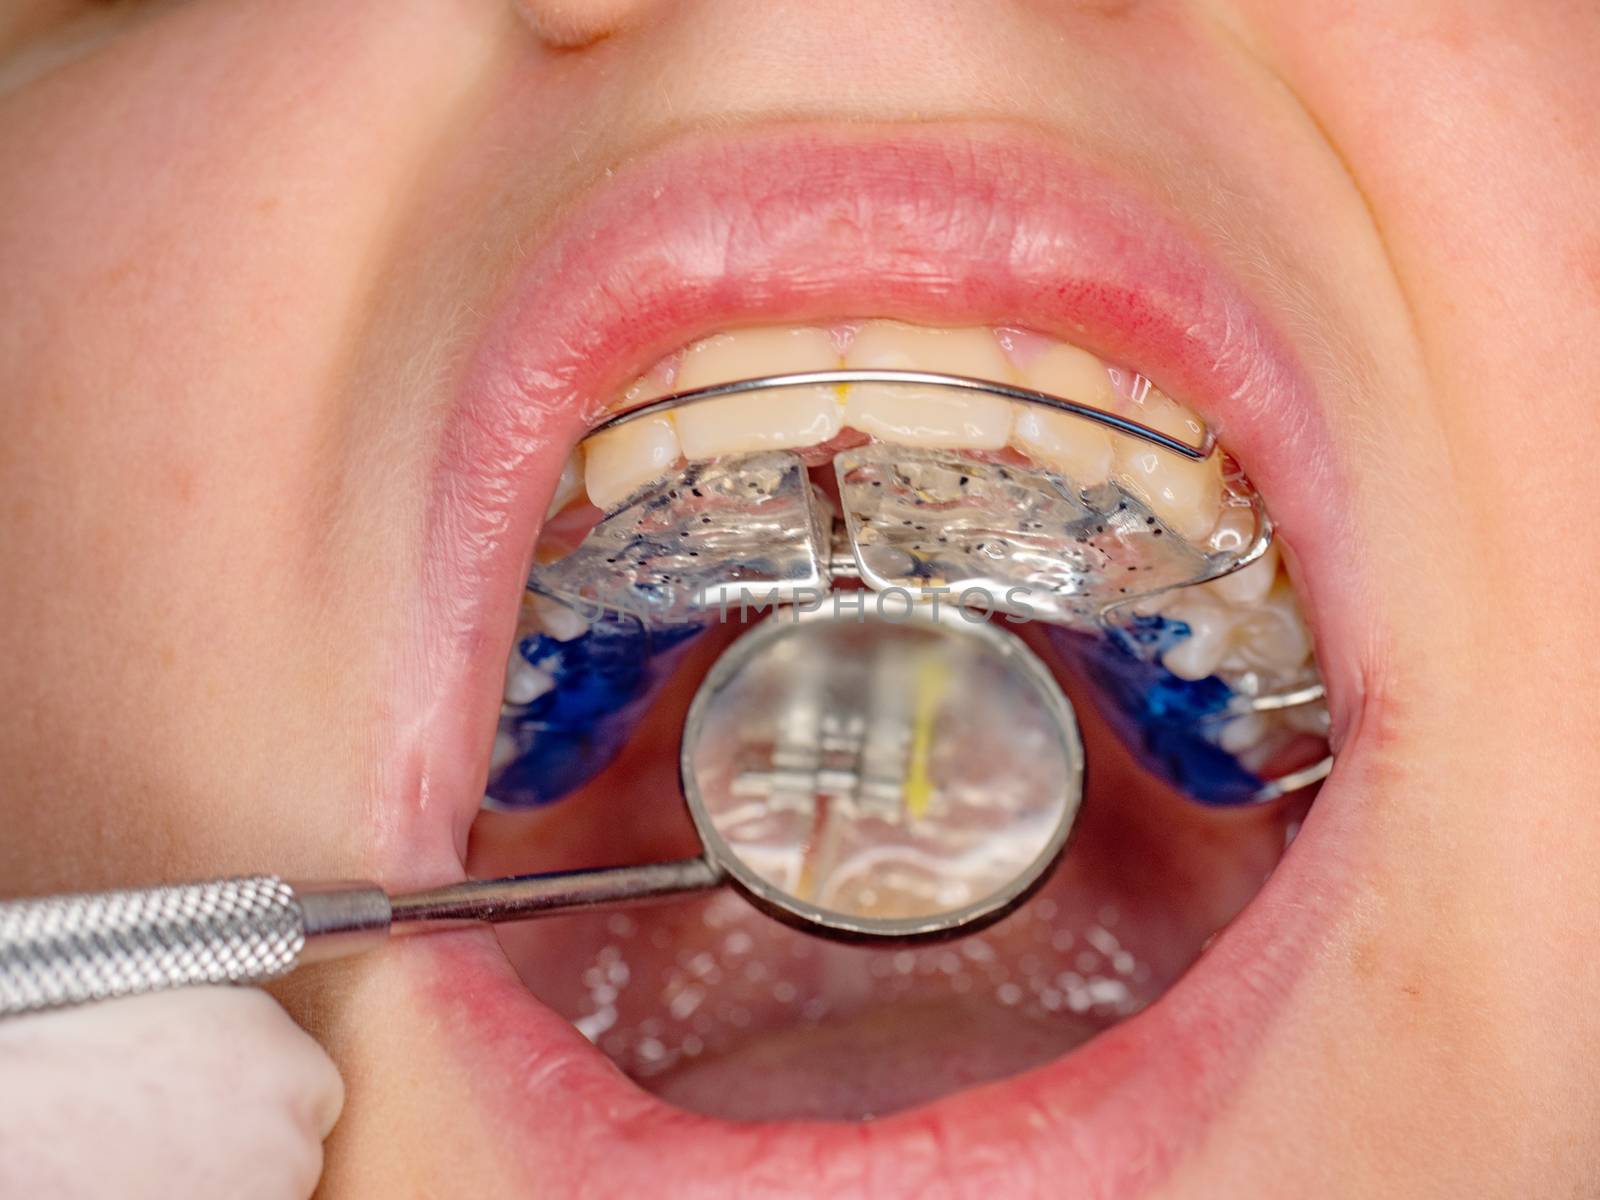 Control of teeth braces setting in patient mouth. by rdonar2